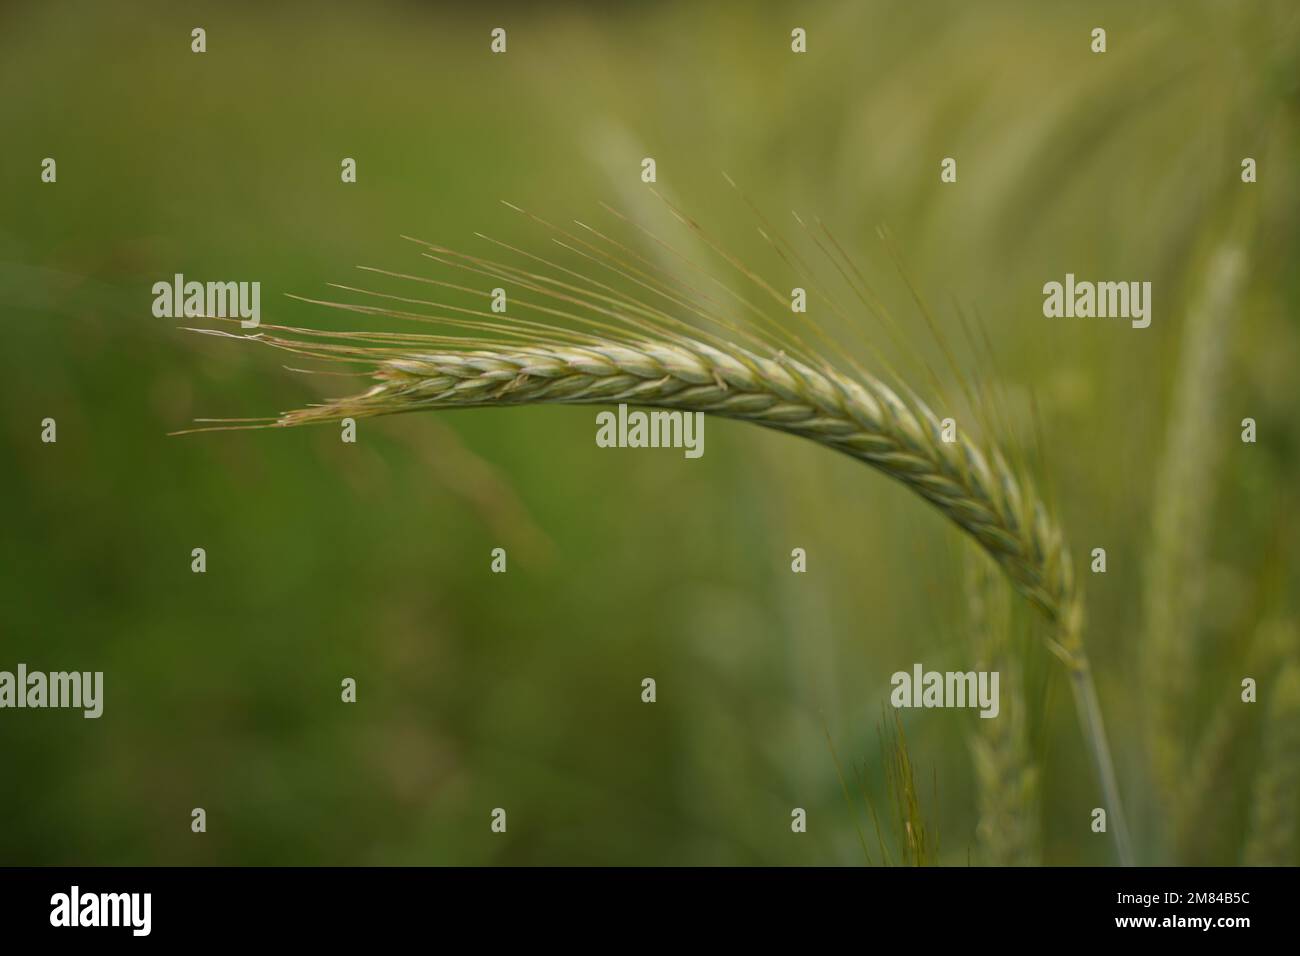 A green wheat spike close-up against a blurry wheat field Stock Photo